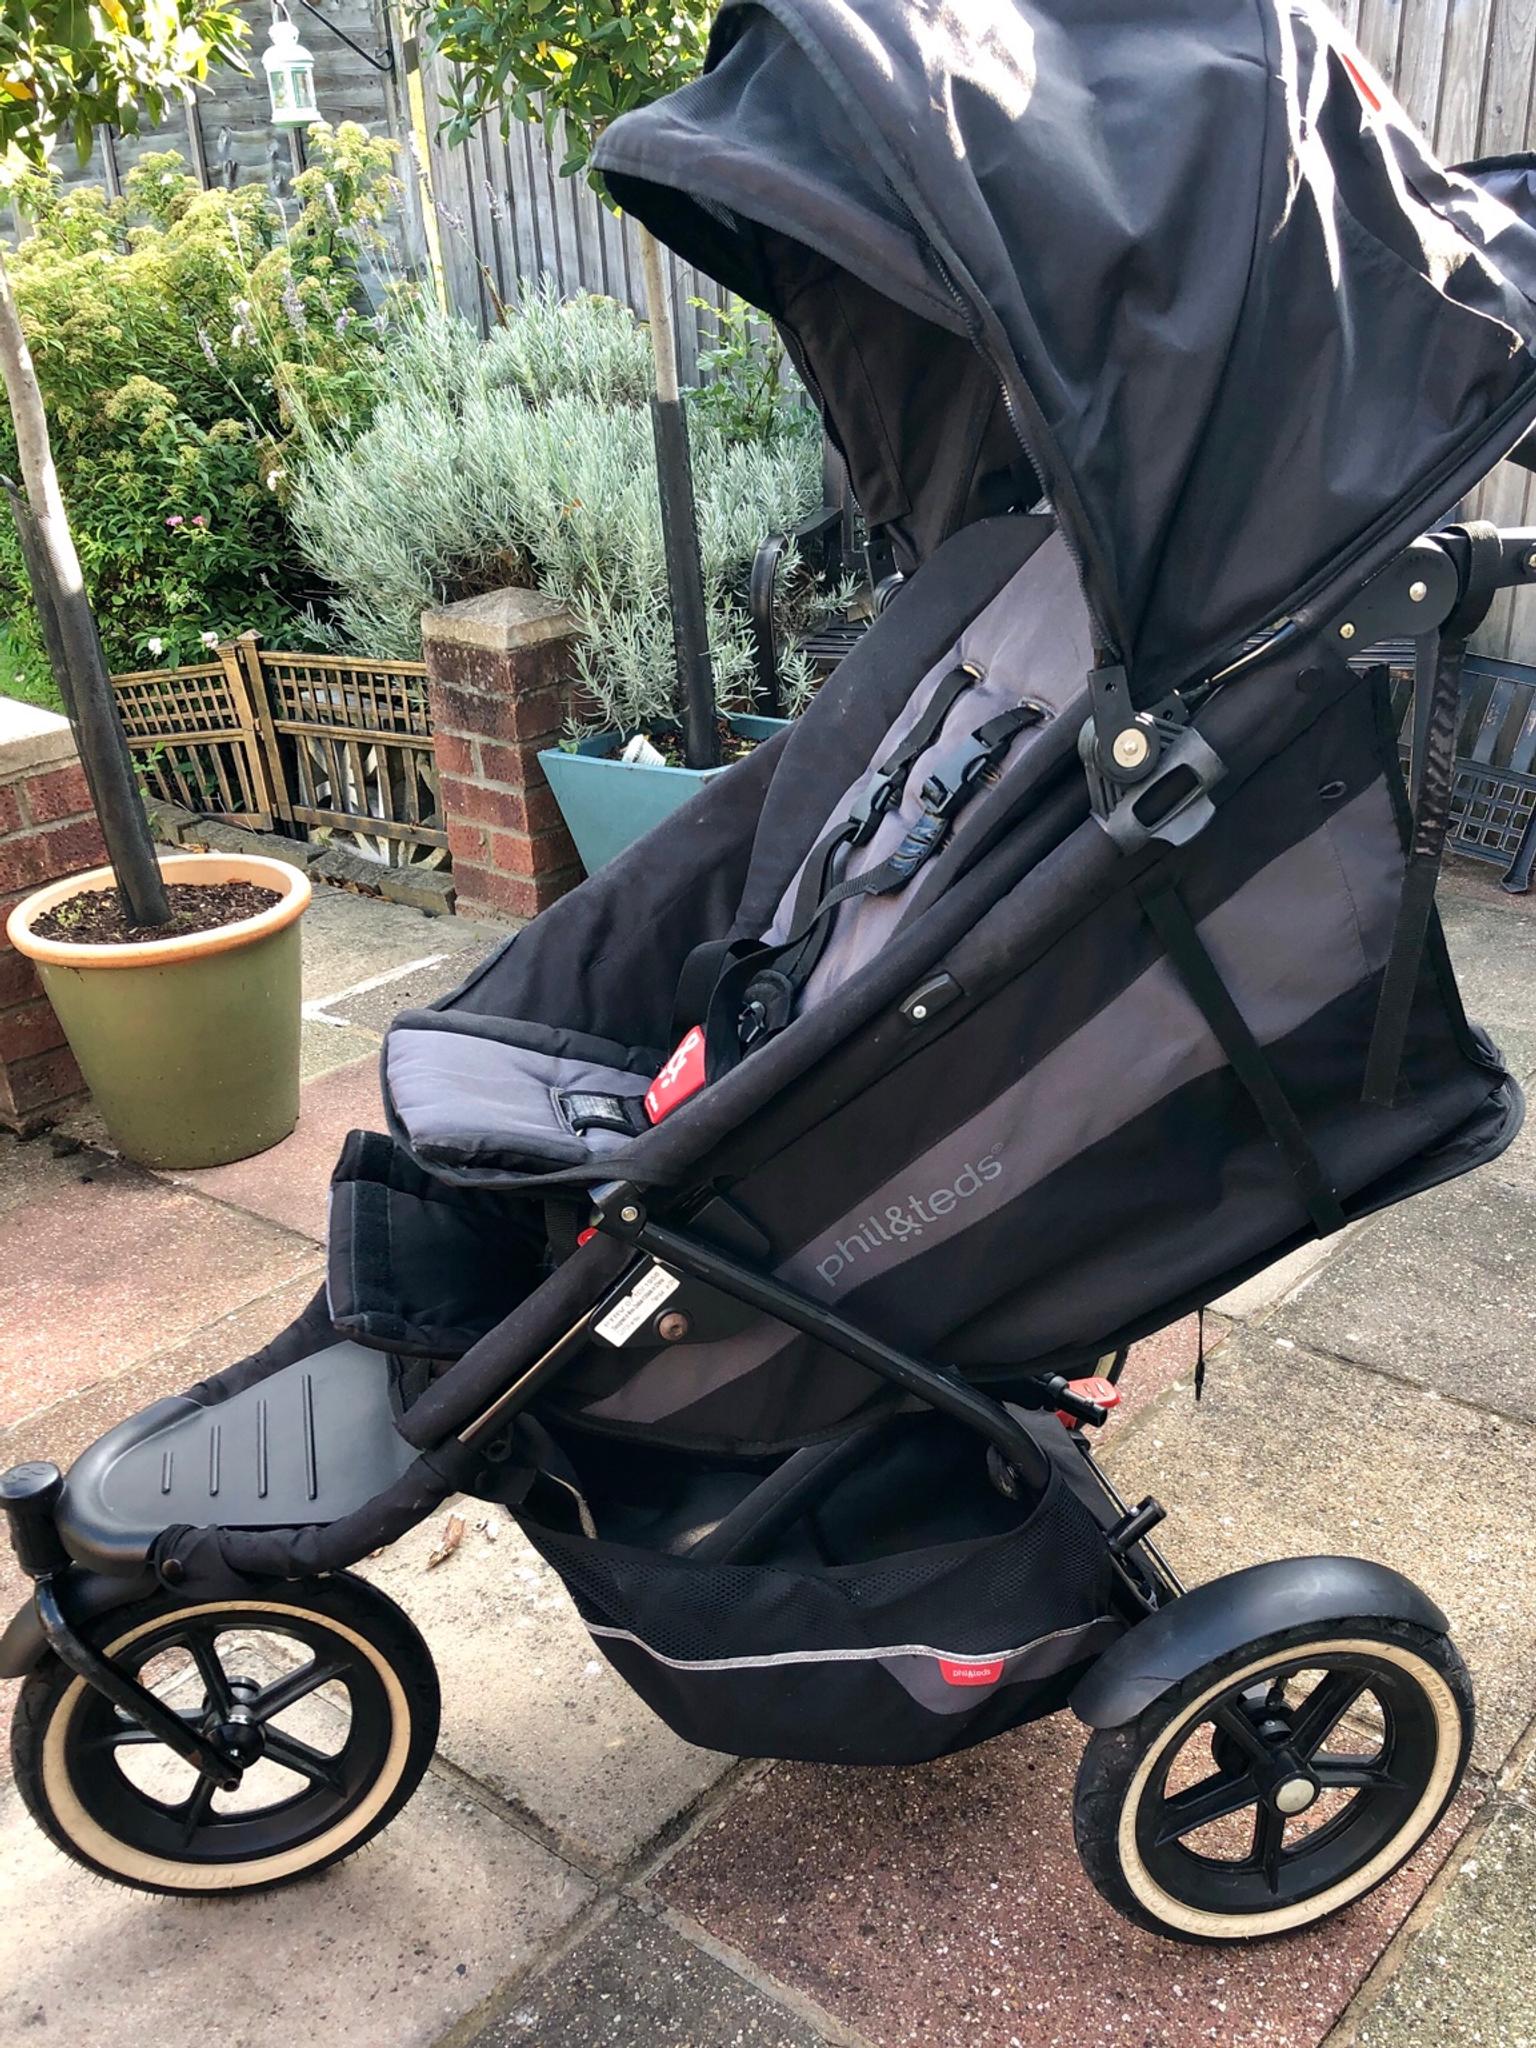 phil and ted double stroller used